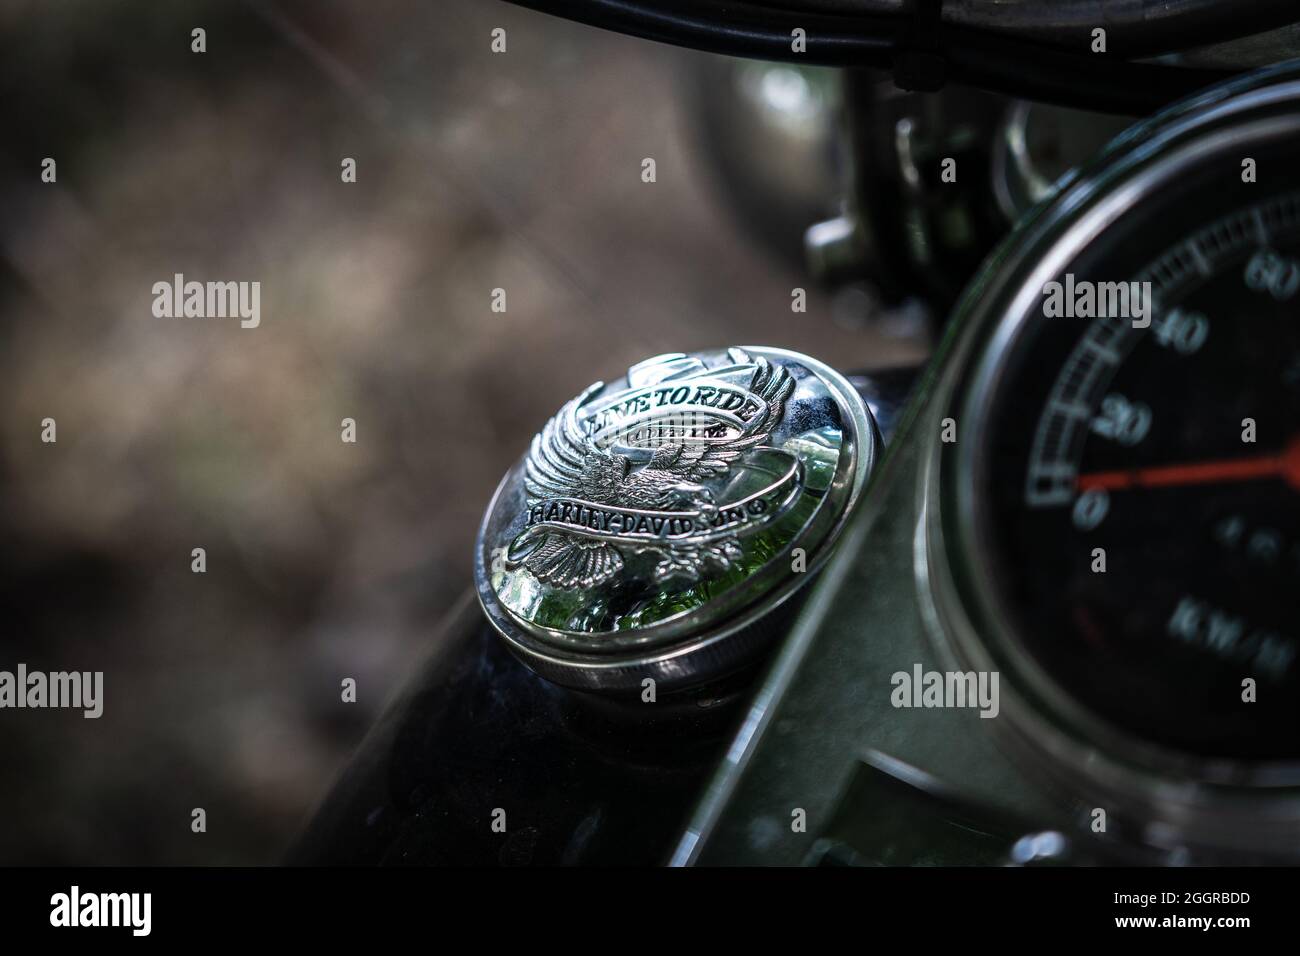 DIEDERSDORF, GERMANY - AUGUST 21, 2021: Detail of the fuel tank cap of motorcycle Harley-Davidson. The exhibition of 'US Car Classics'. Stock Photo